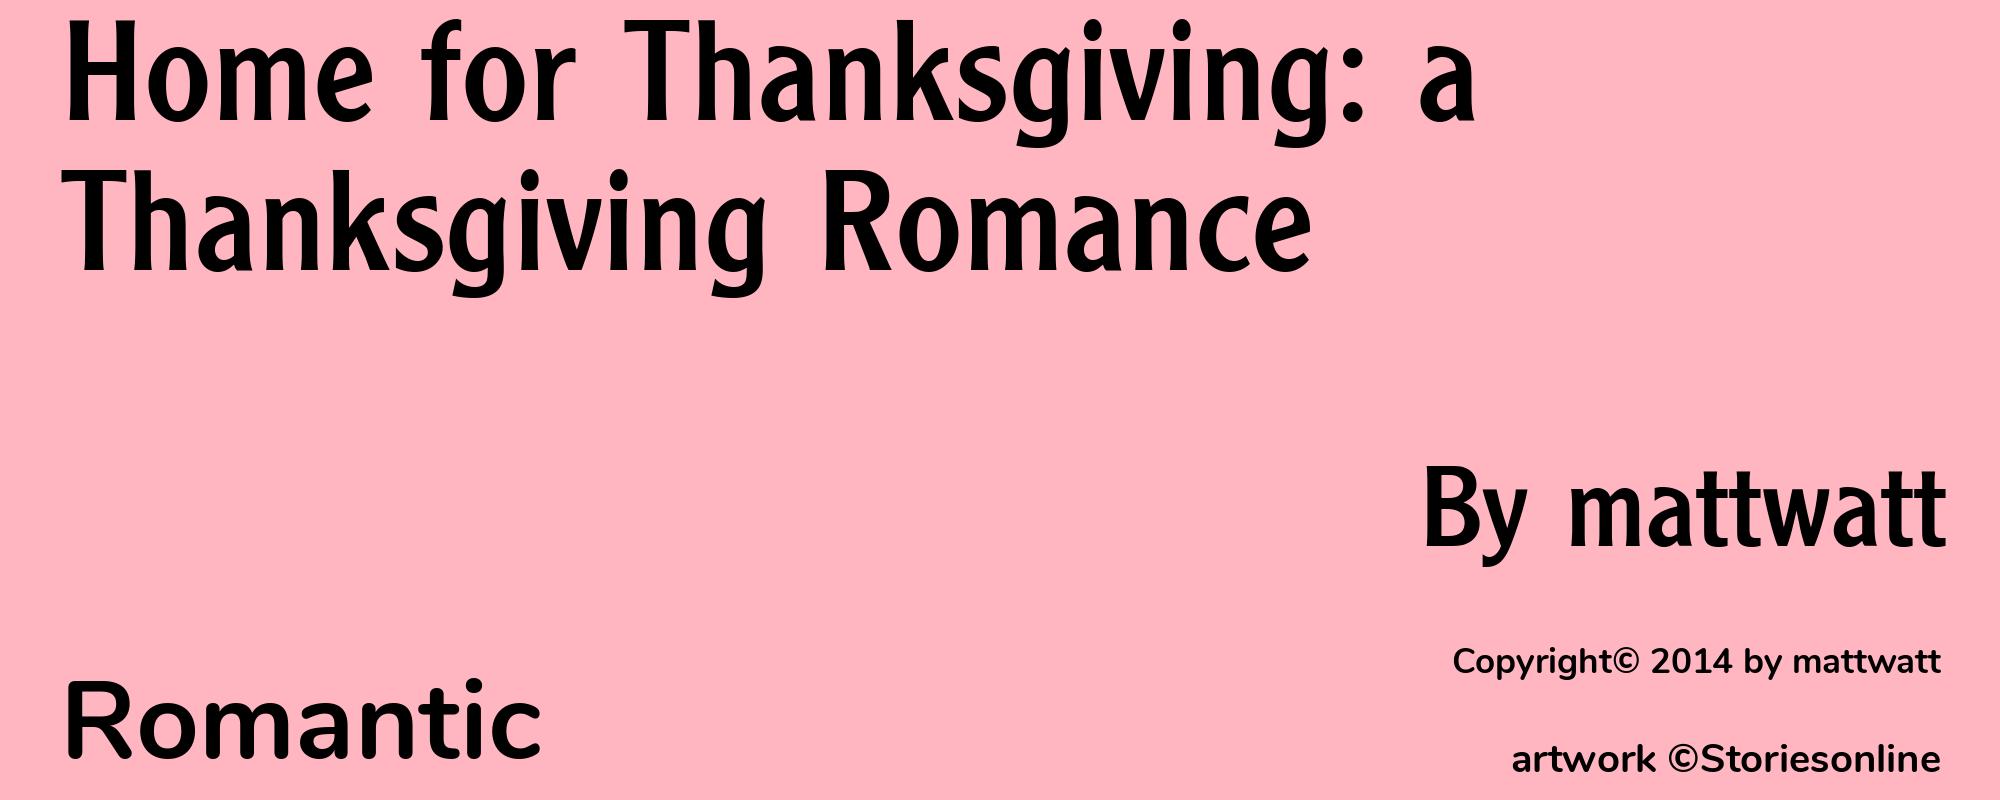 Home for Thanksgiving: a Thanksgiving Romance - Cover